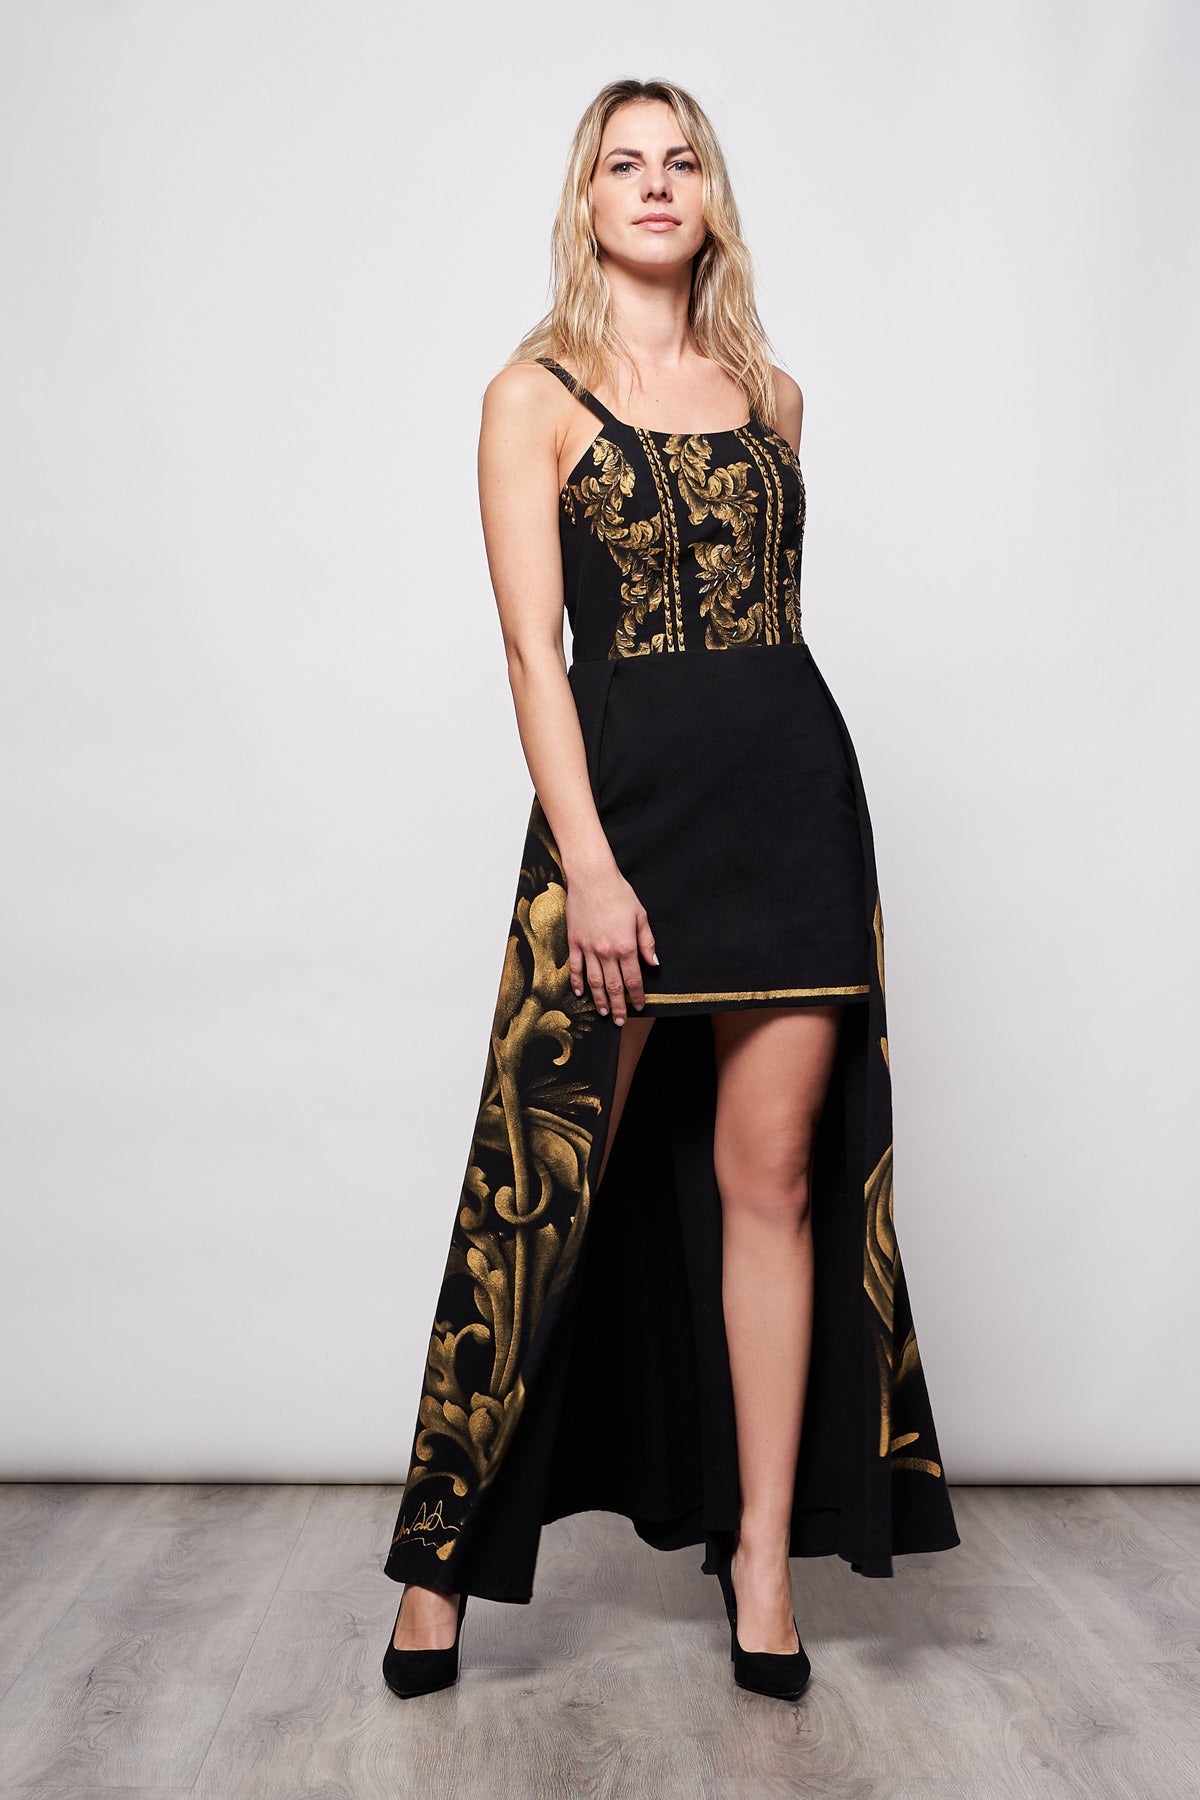 LONG HIGH-LOW DRESS HAND-PAINTED AND HAND EMBROIDERED - TALAVERA ORO